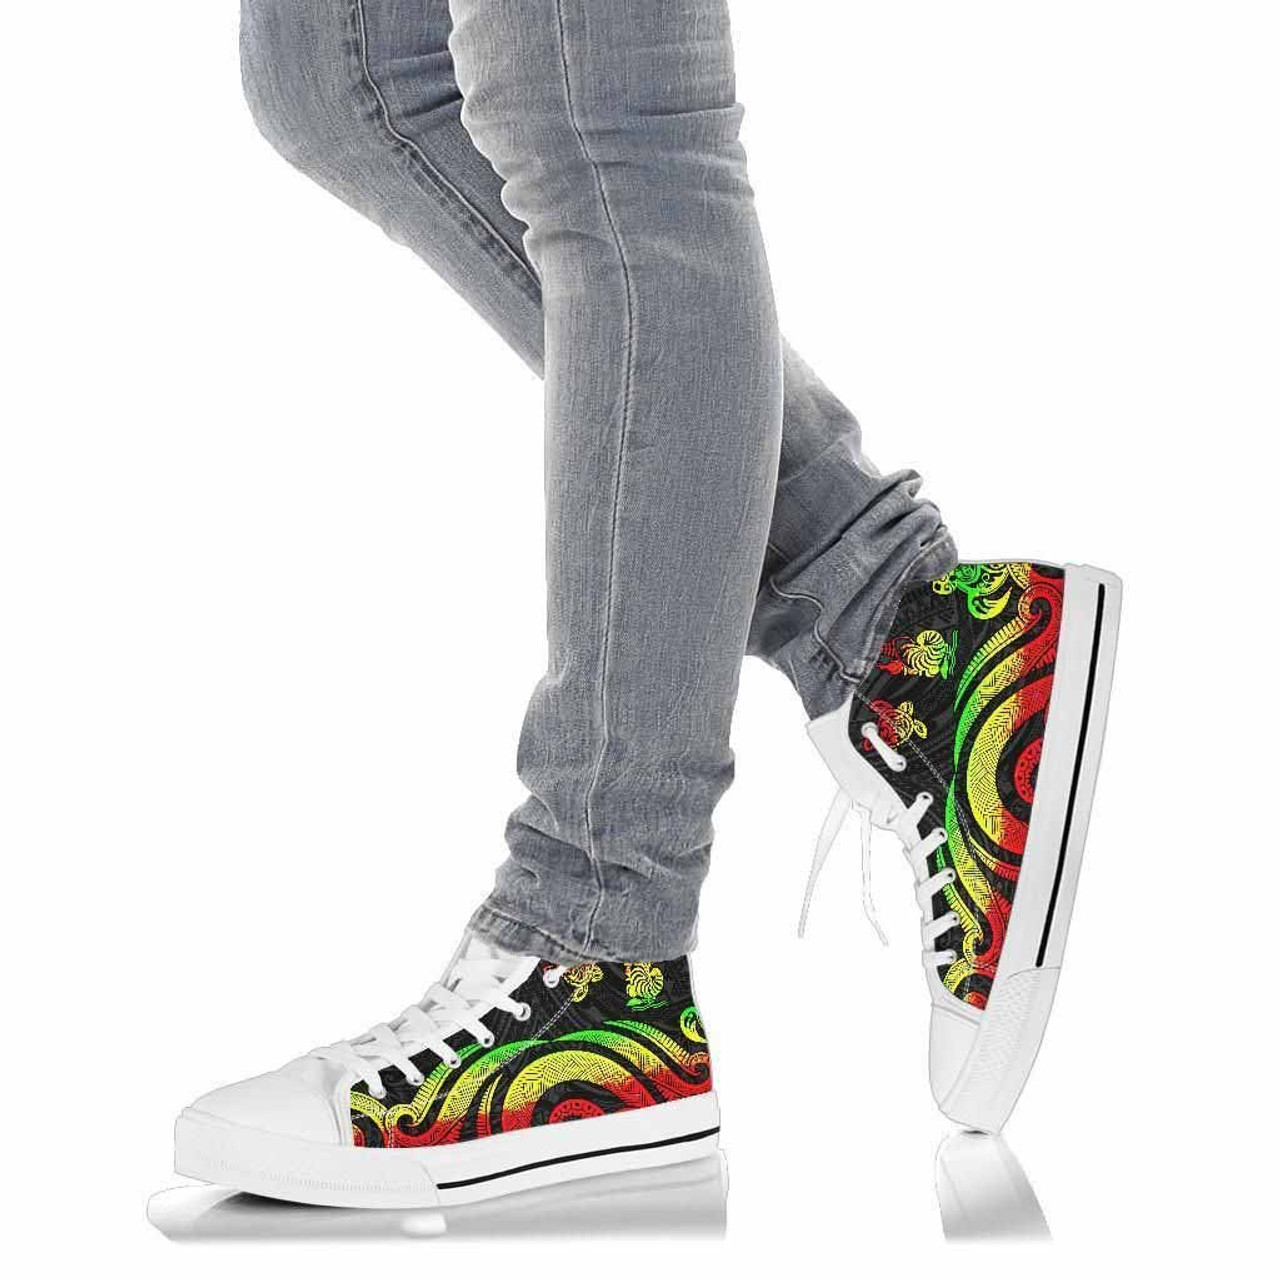 New Caledonia High Top Canvas Shoes - Reggae Tentacle Turtle 9